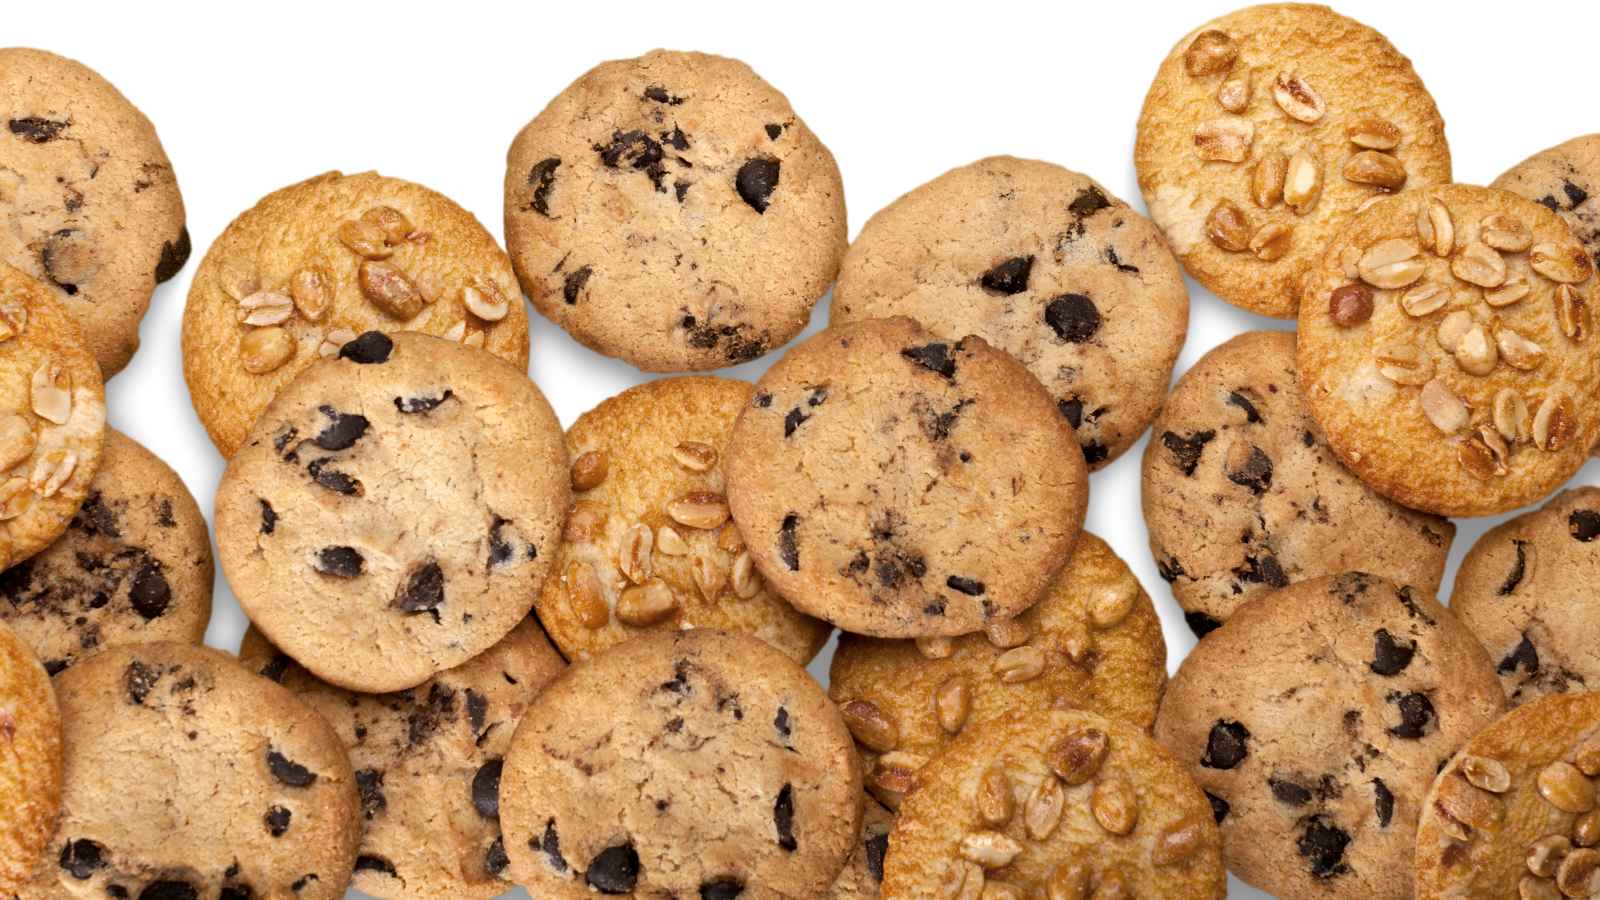 <p><span>Store-bought cookies are usually high in sugar and unhealthy fats, making them a calorie-dense food with minimal nutritional value. They’re often made with ingredients like high fructose corn syrup and artificial flavors.</span></p><p><span>High fructose corn syrup and added sugars can lead to obesity and metabolic issues. Try baking your own cookies with healthier ingredients like whole wheat flour and dark chocolate chips.<br> </span></p>